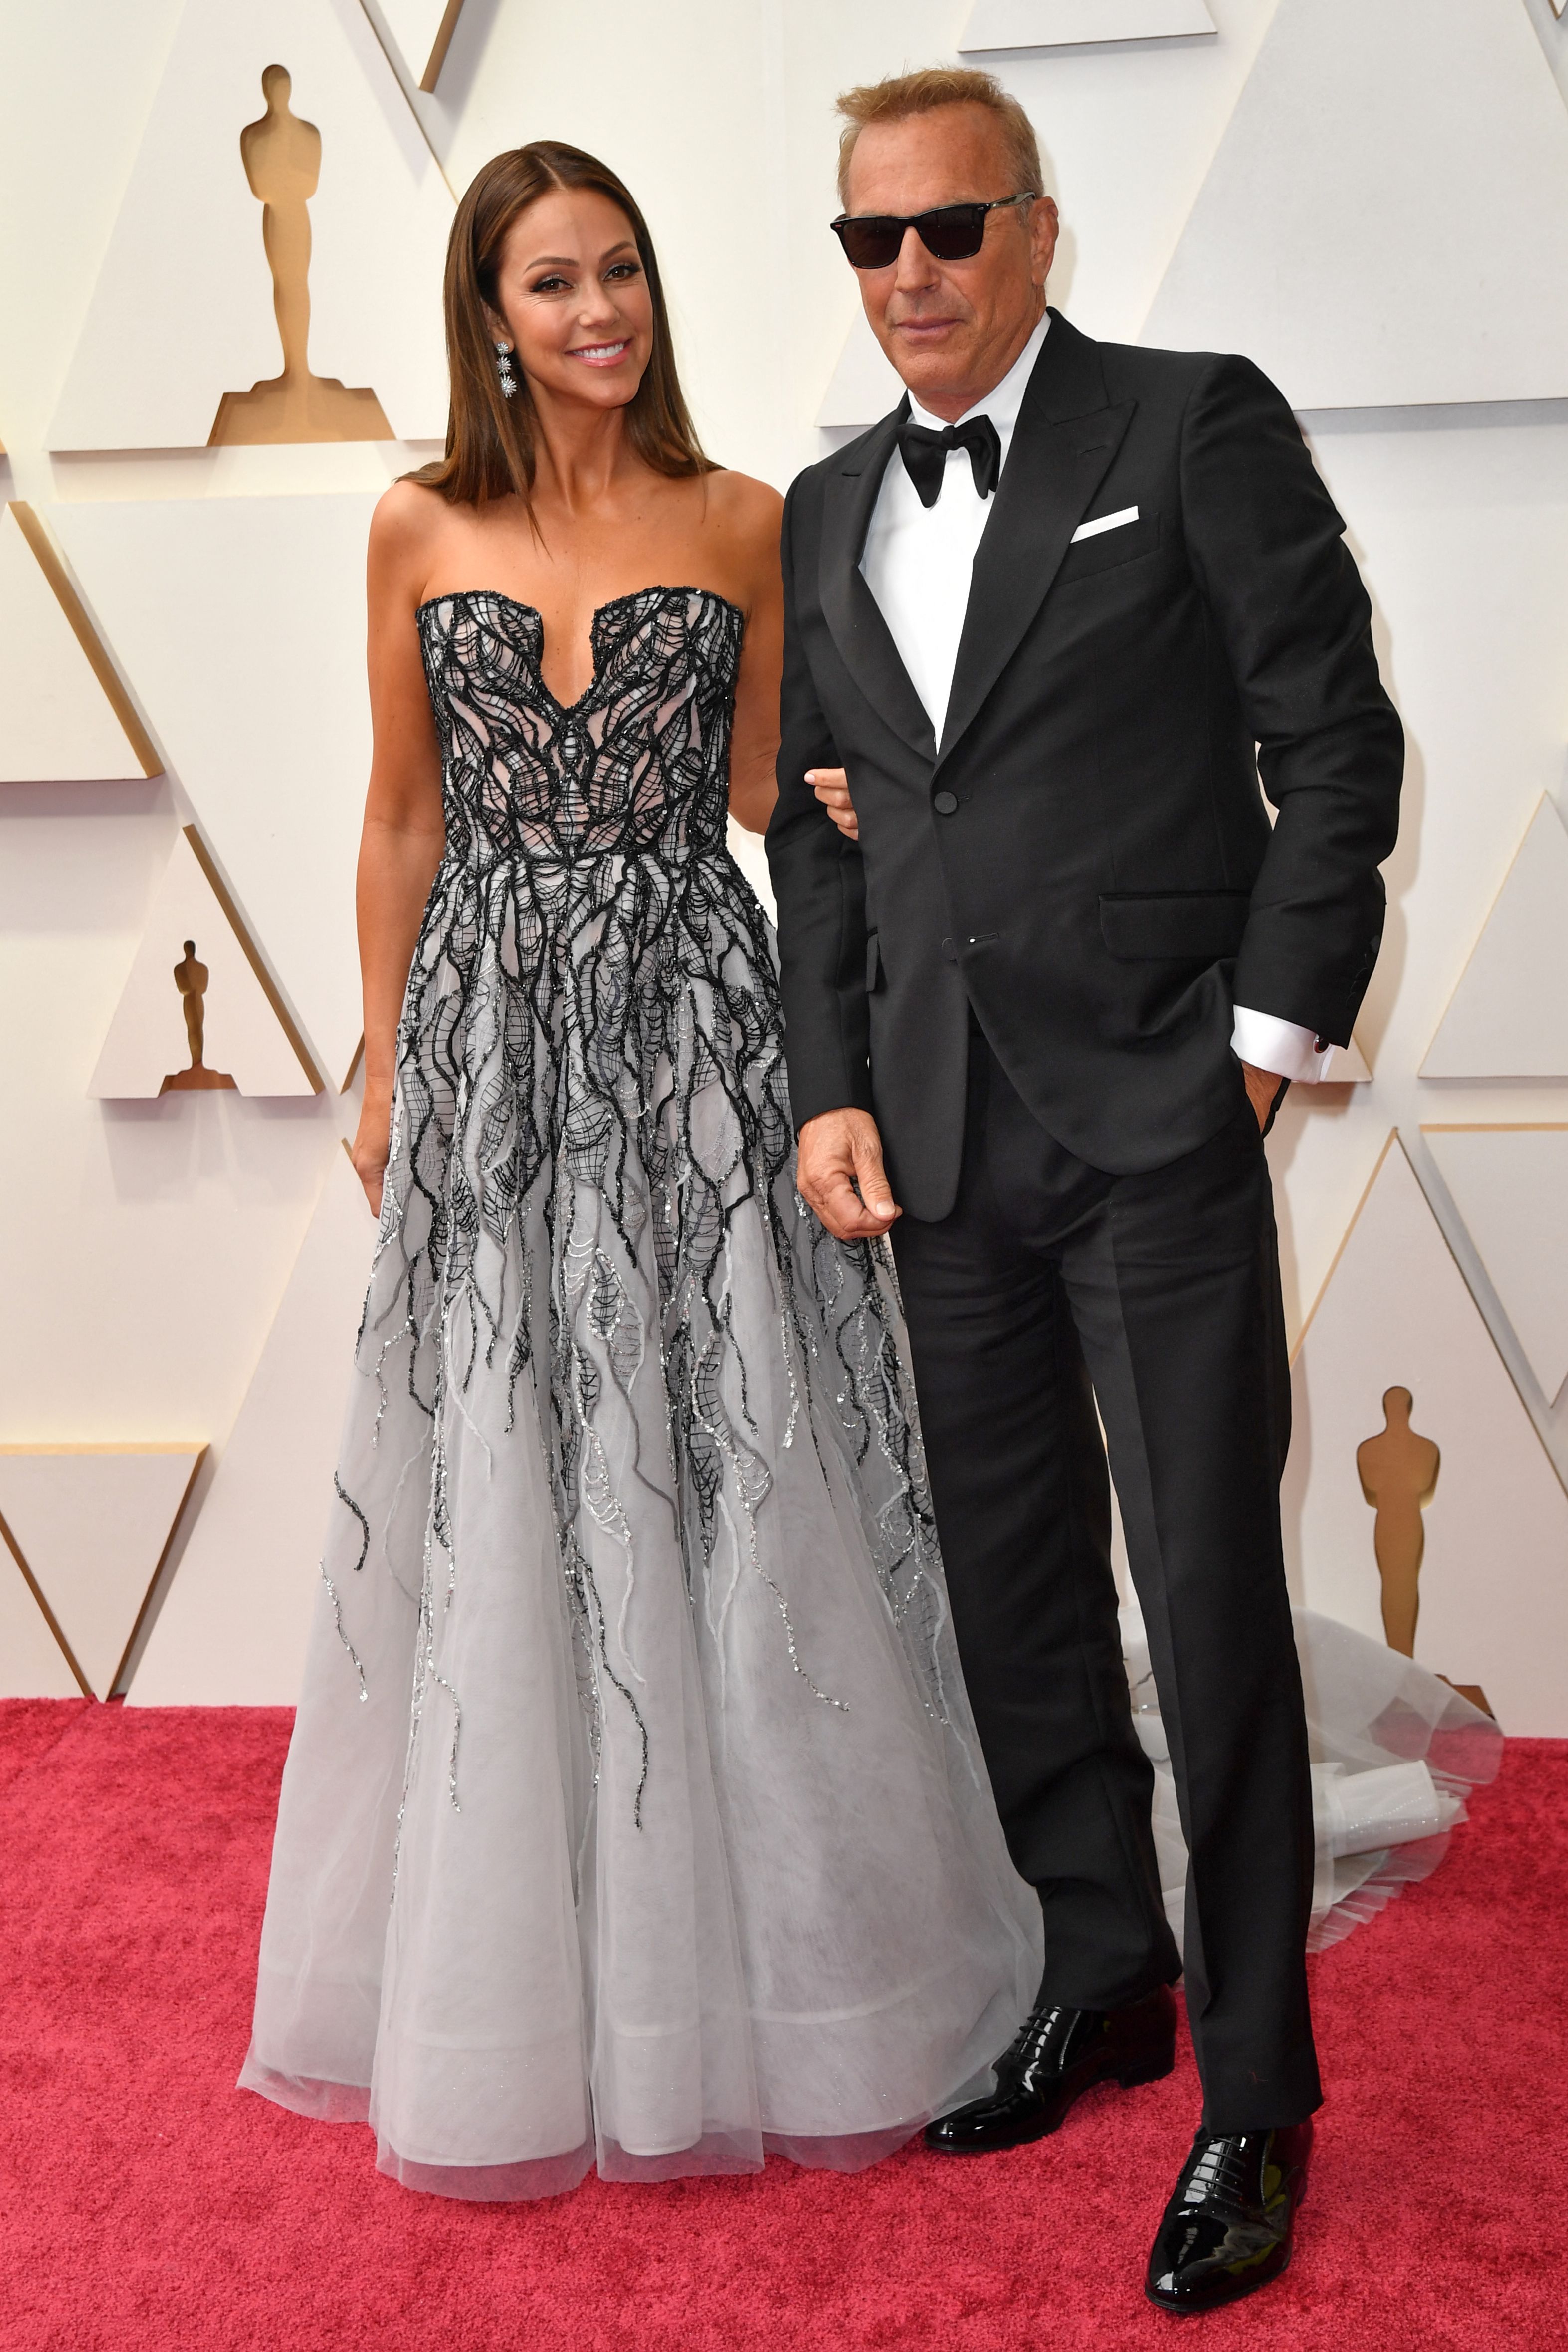 Kevin Costner and his wife Christine Baumgartner at the 94th Academy Awards at the Dolby Theatre in Hollywood, California on March 27, 2022 | Source: Getty Images